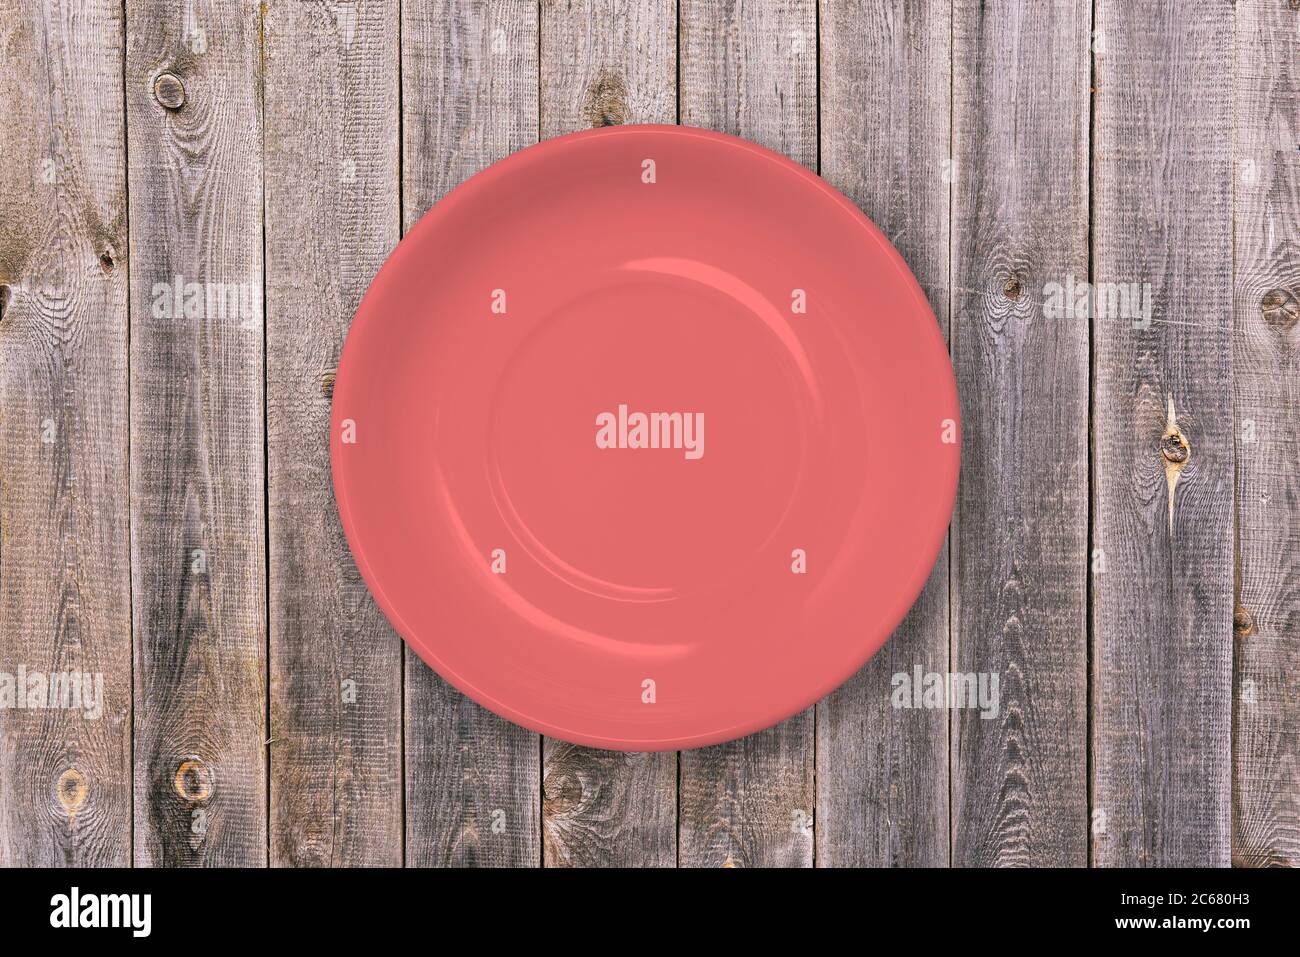 Plate on a wooden table. Red empty food plate. A dish for Breakfast, lunch and dinner. Tableware for home and restaurant. Concept of food and cooking Stock Photo